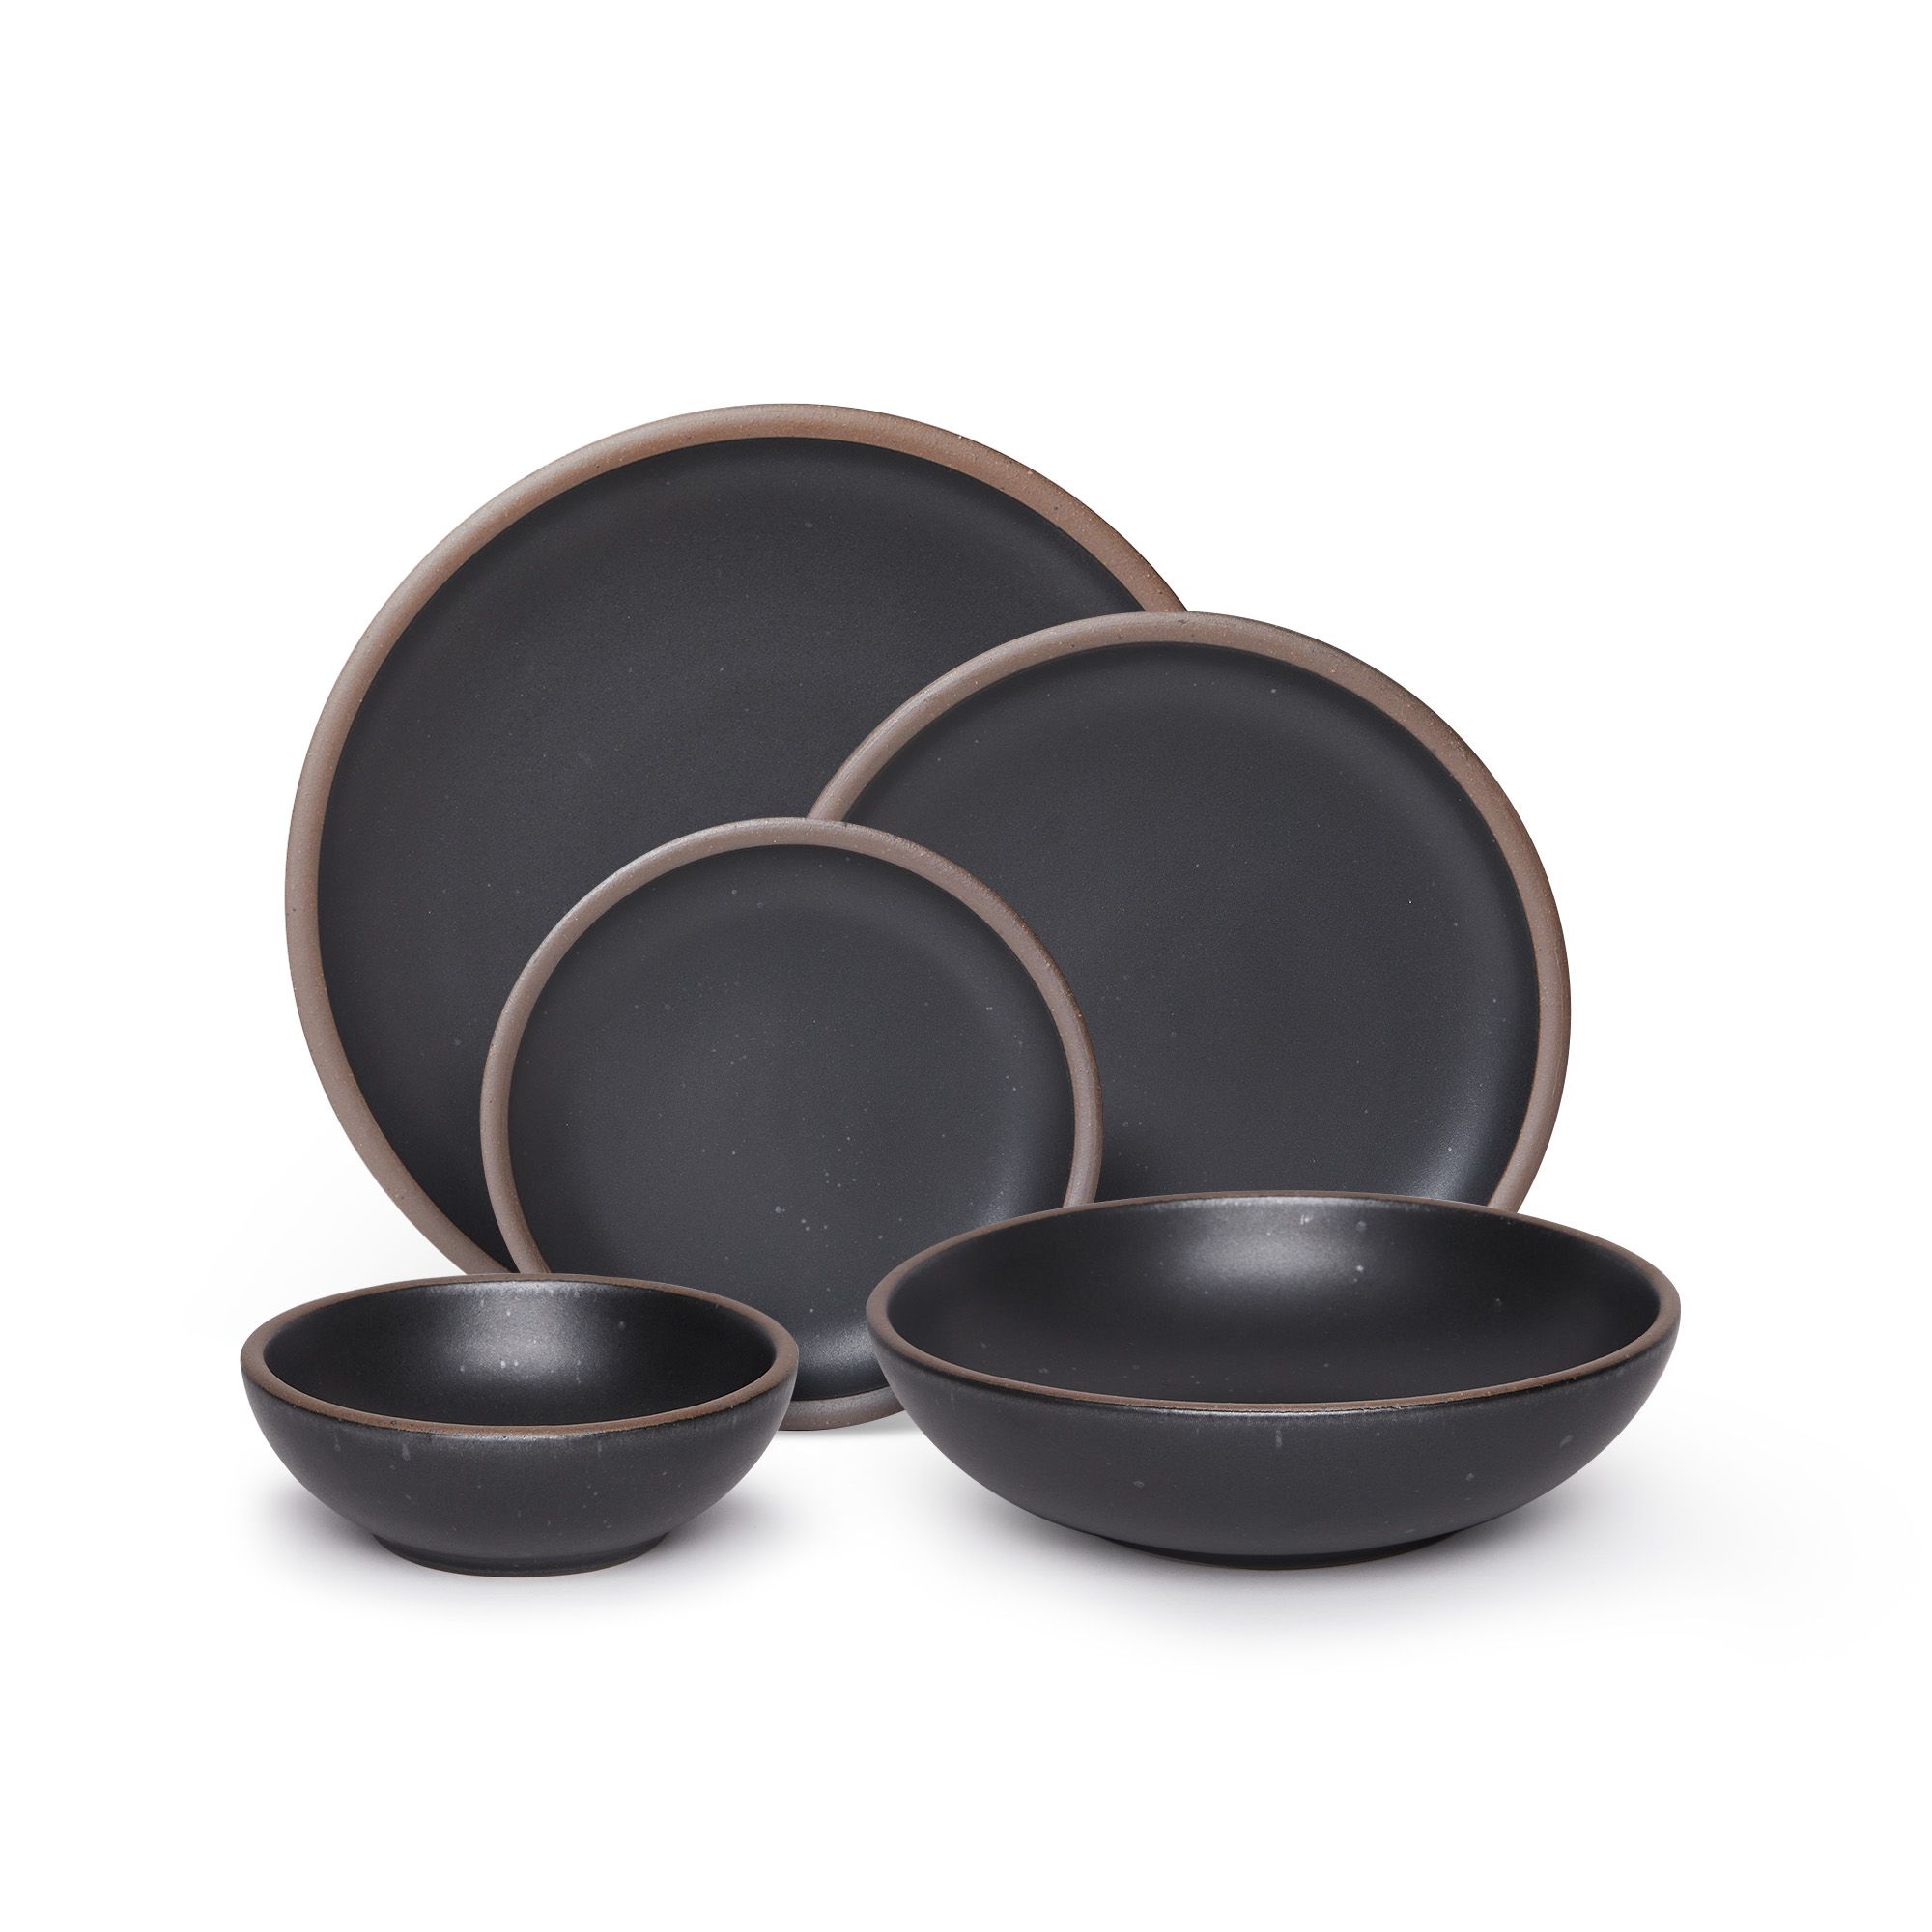 A breakfast bowl, everyday bowl, cake plate, side plate and dinner plate paired together in a graphite black featuring iron speckles